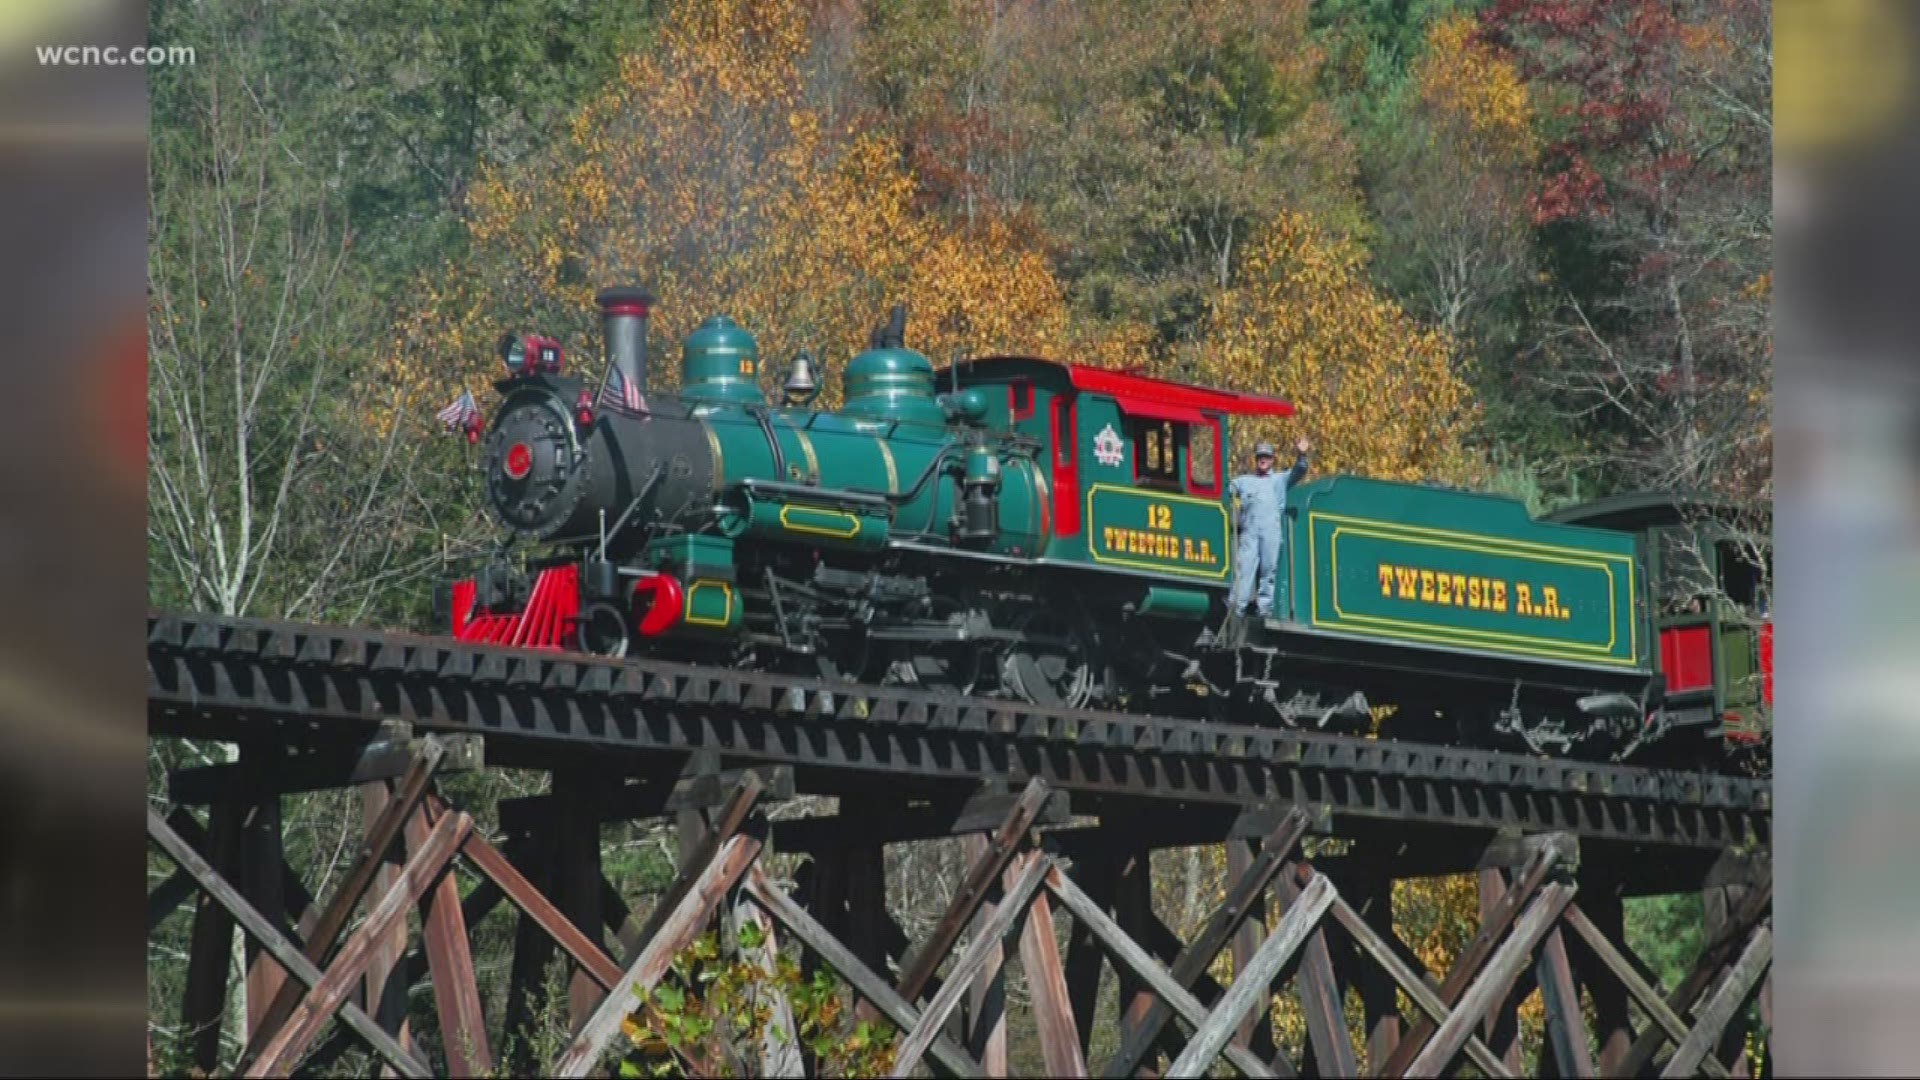 If you haven’t made spring break plans with the family yet, head to Tweetsie Railroad in the Blue Ridge Mountains for fun rides and attractions.